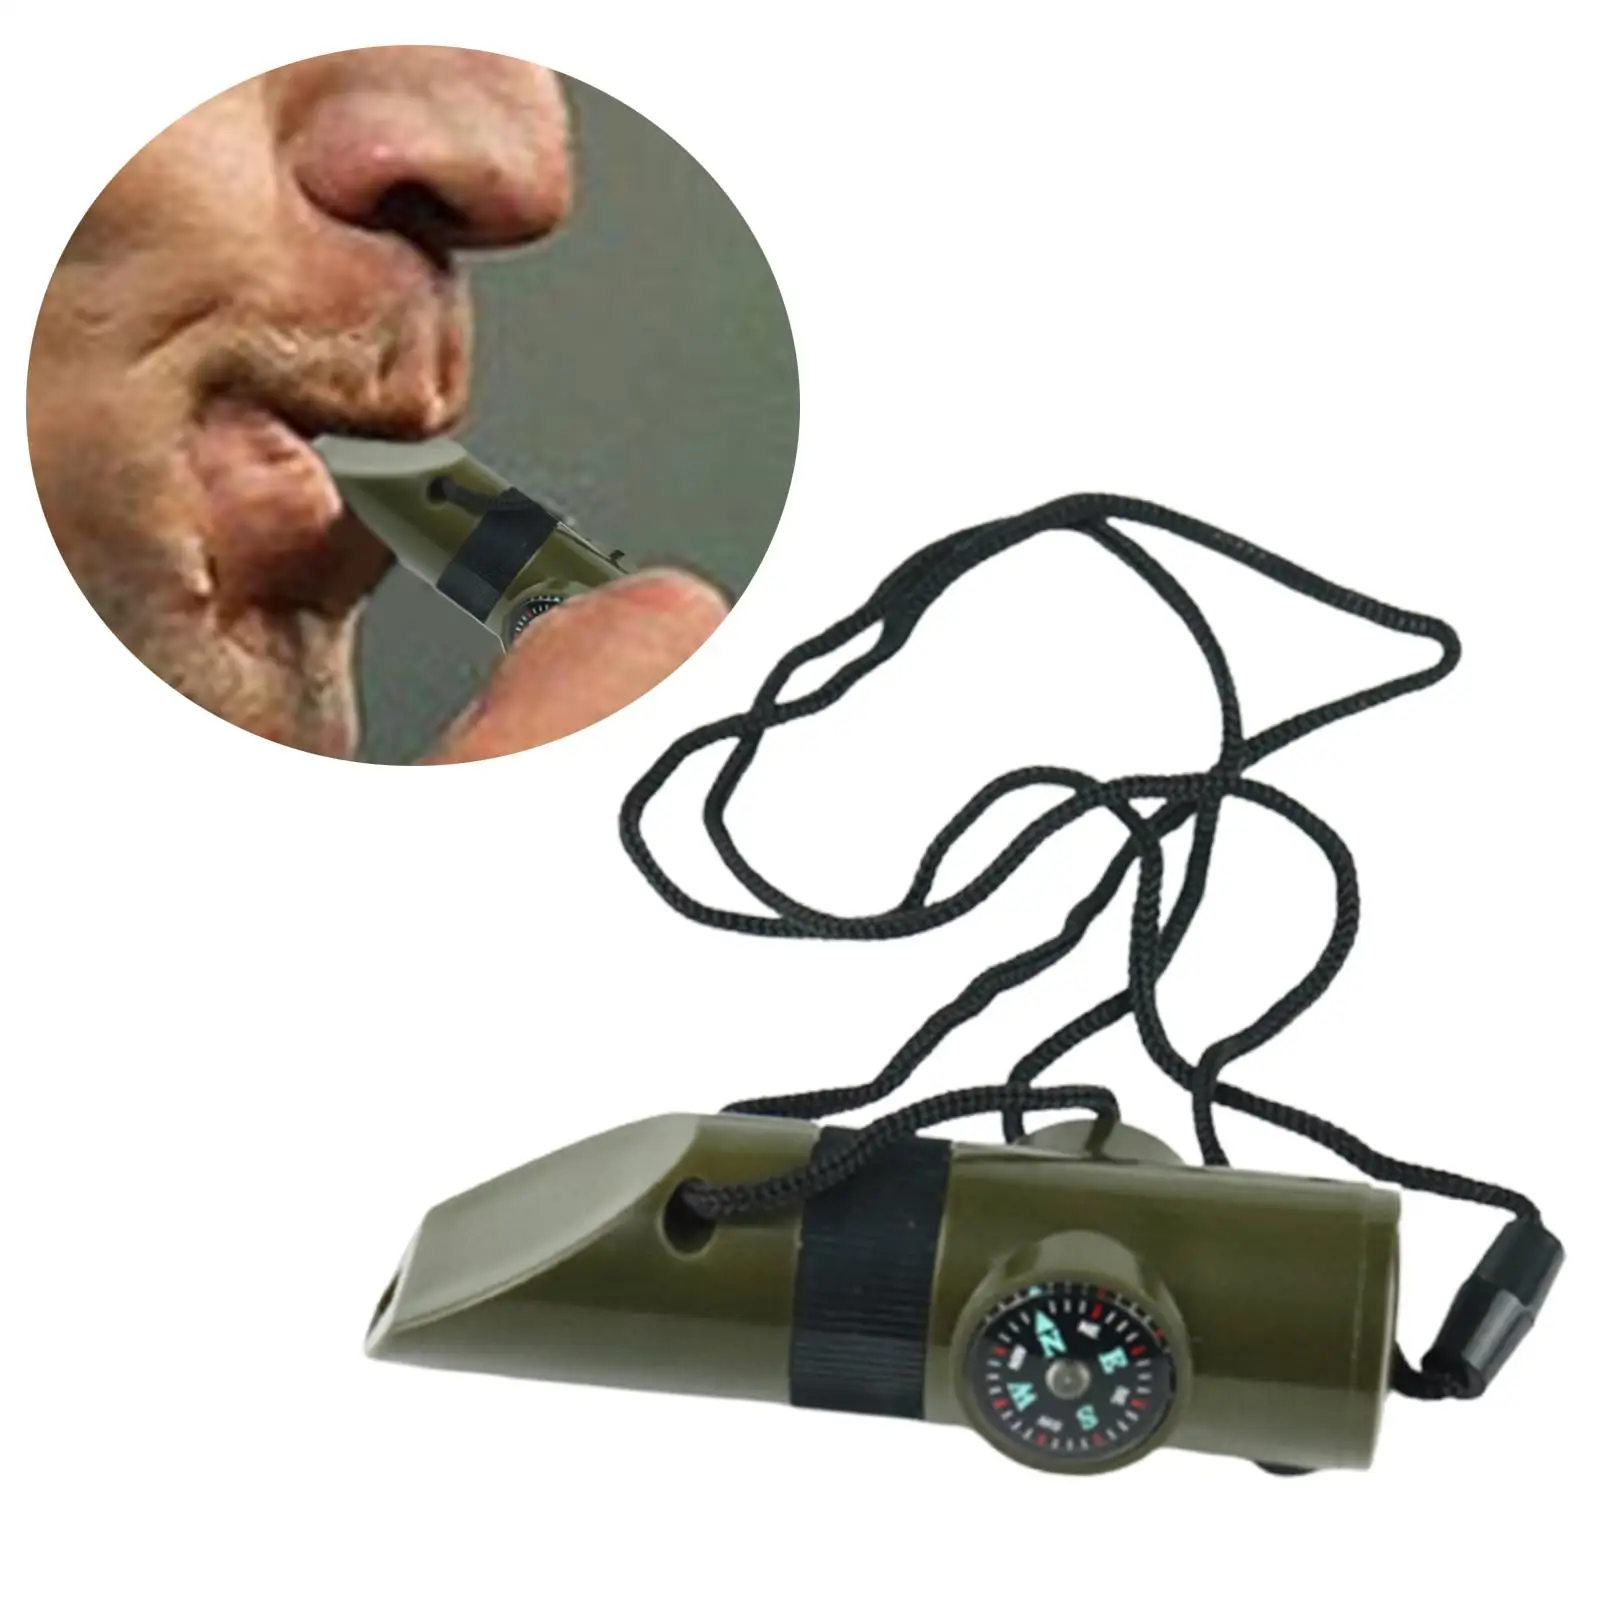 7in1 Emergency Whistle Kit Survival Compass LED Flashlight Outdoor Camping